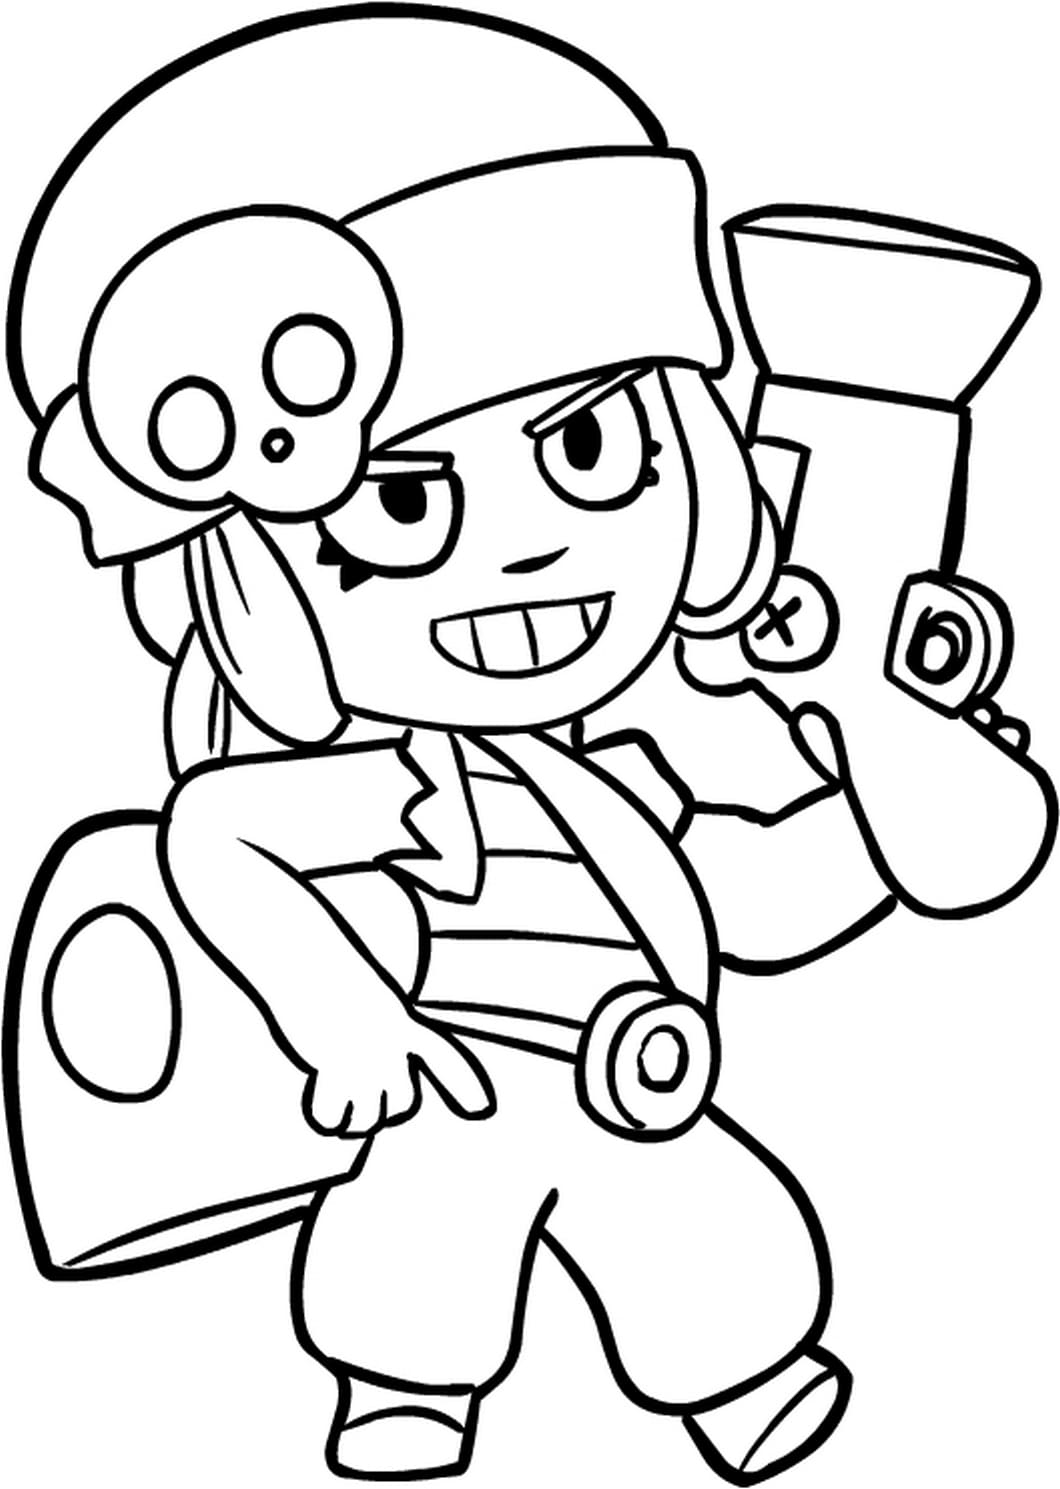 Free Brawl Stars Coloring Pages Pirate Penny printable